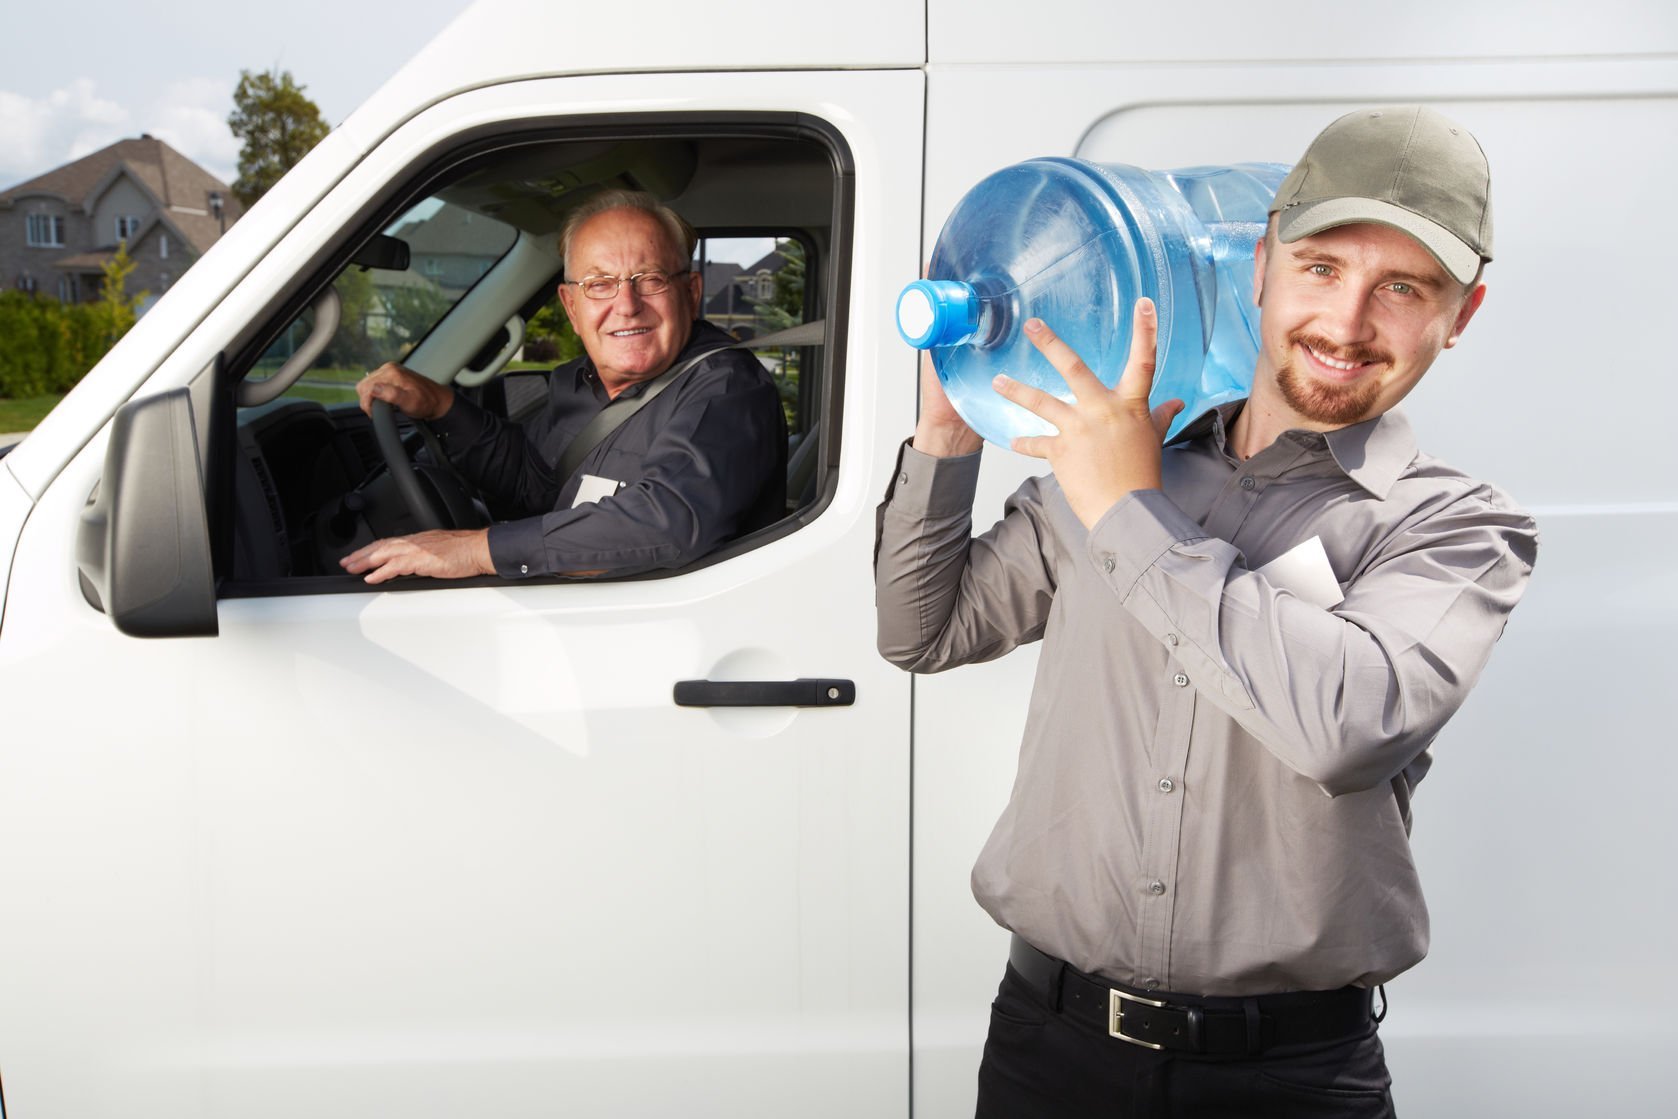 Schedule a Water Delivery